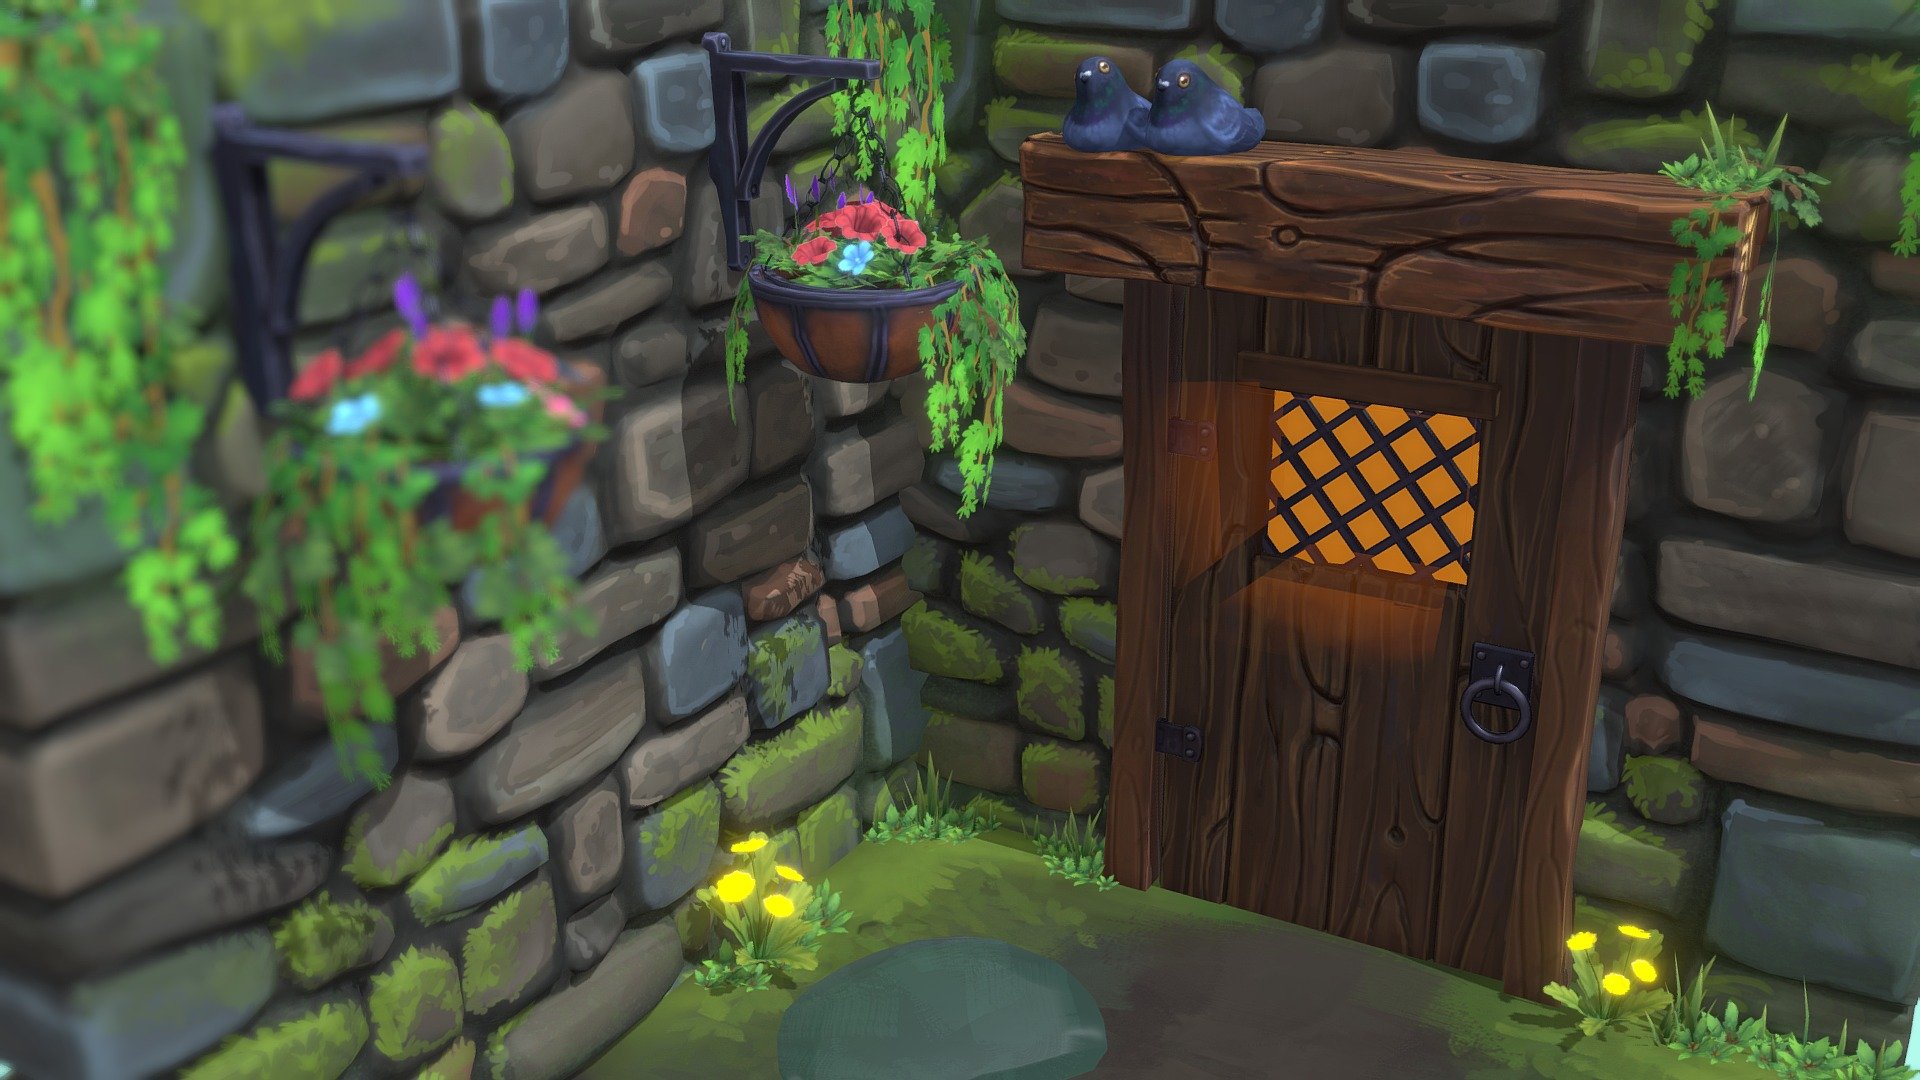 A short peronal project featuring pigeons nesting and standing around in puddles, flowers, and old cozy walls - a tiny cozy corner 

Made in Maya, Zbrush, Substance Painter 

my twitter: twitter.com/rosiejarvisart - Pigeon Corner - 3D model by rosiejarvis 3d model